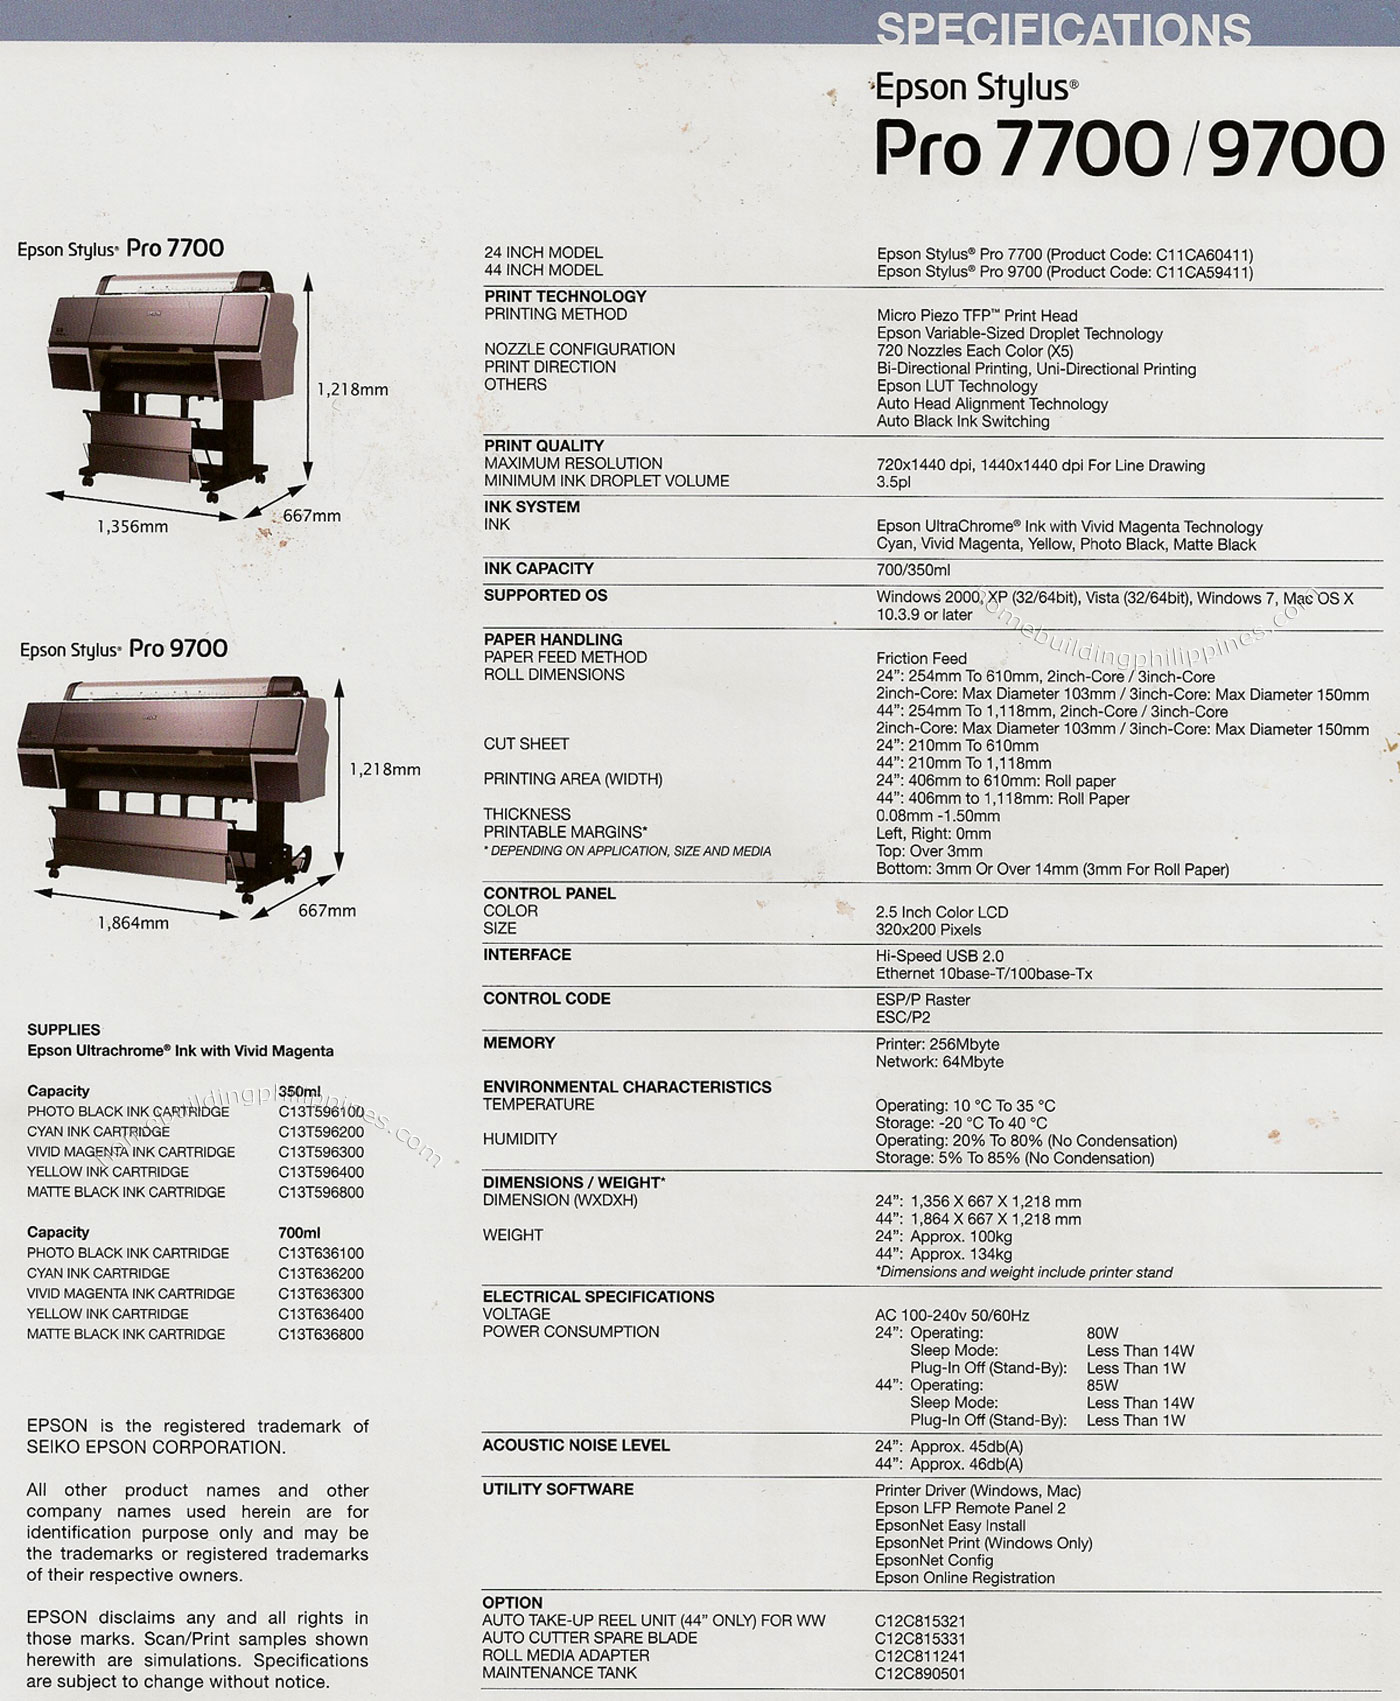 Epson 7700/9700 Large Format Printer Specifications